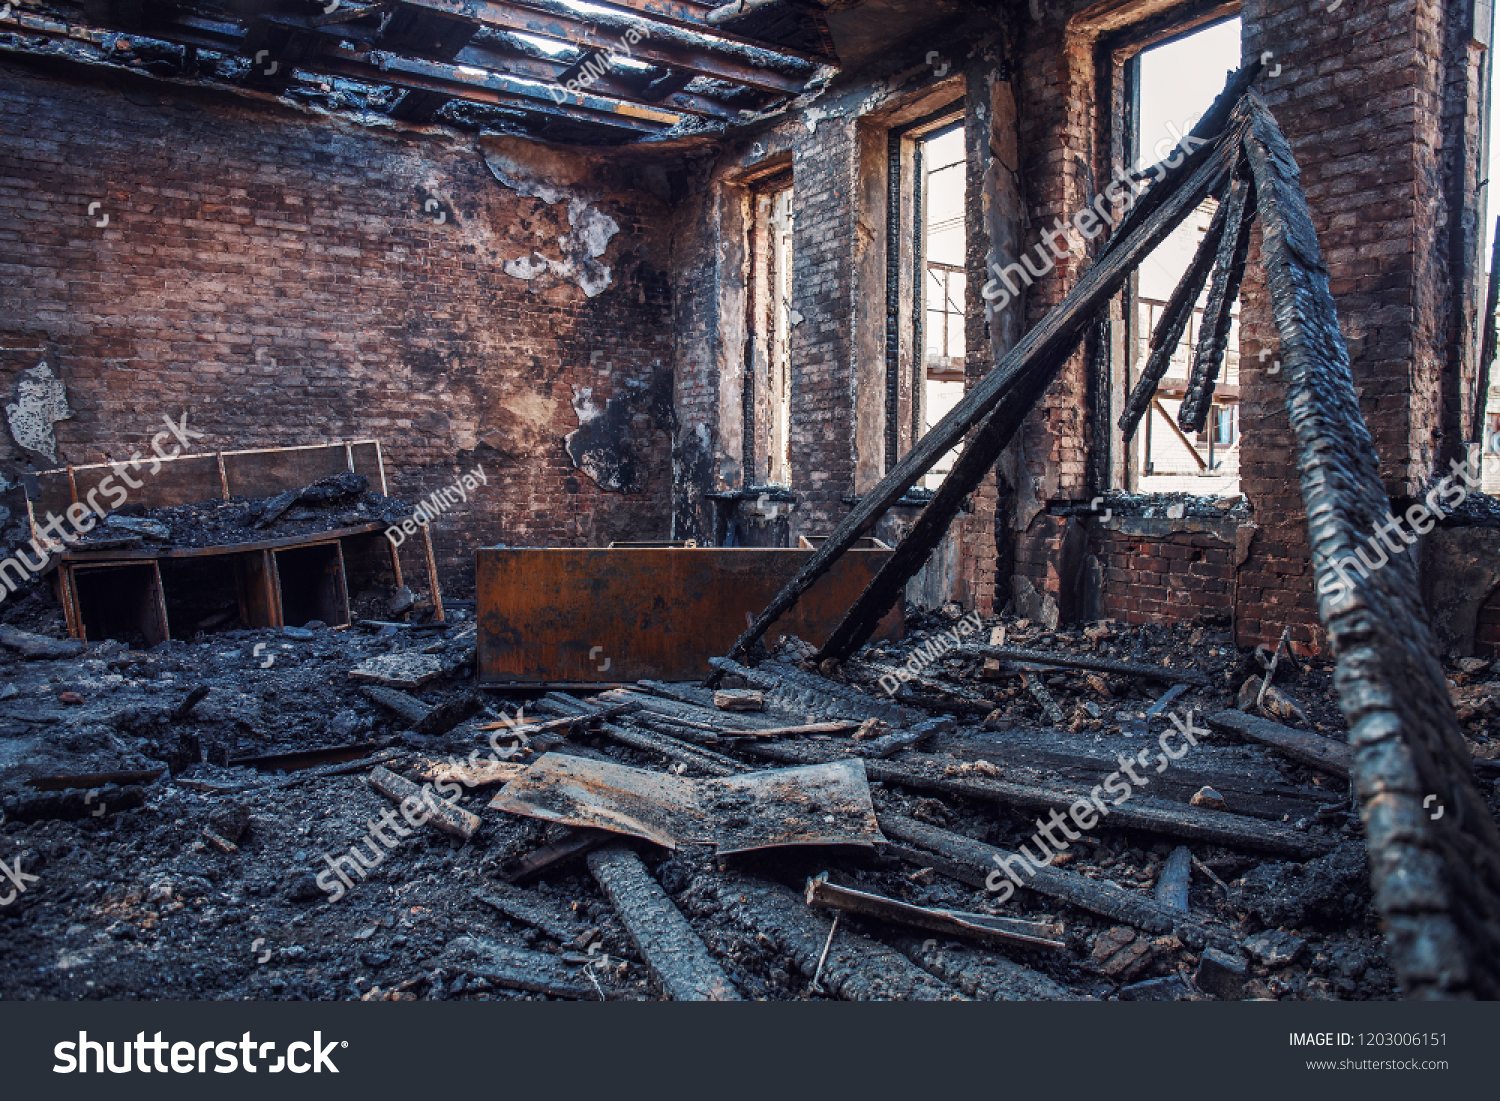 Burned house interior after fire, ruined building room inside, disaster or war aftermath concept #1203006151